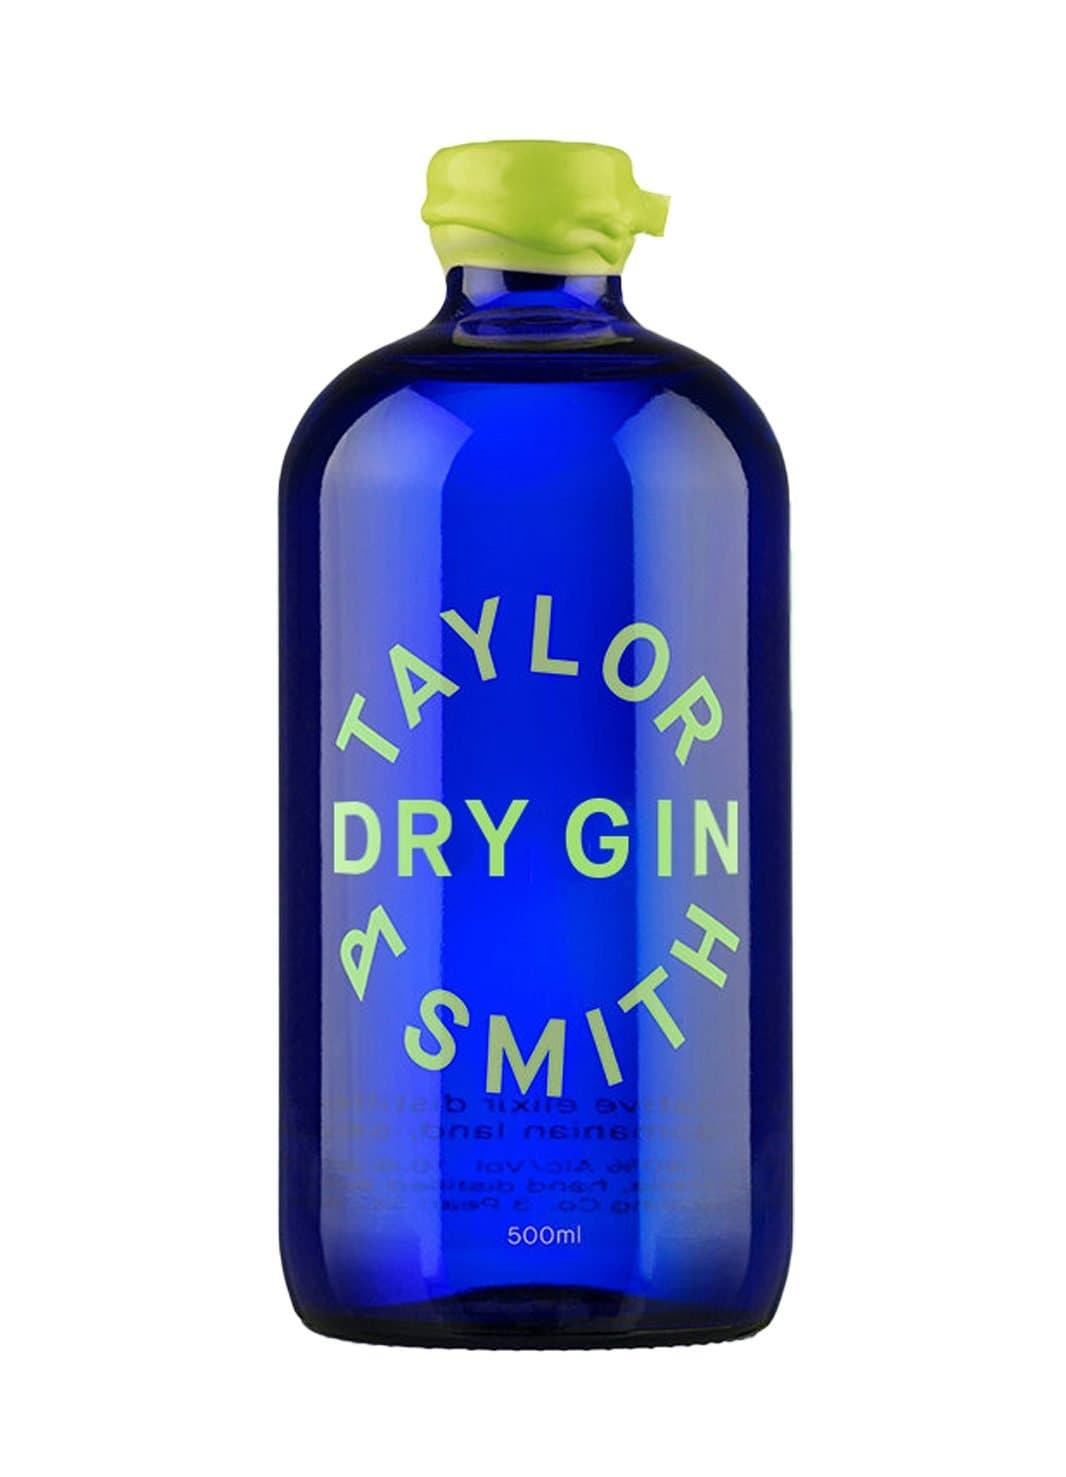 Taylor & Smith Dry Gin 46% 500ml | Gin | Shop online at Spirits of France